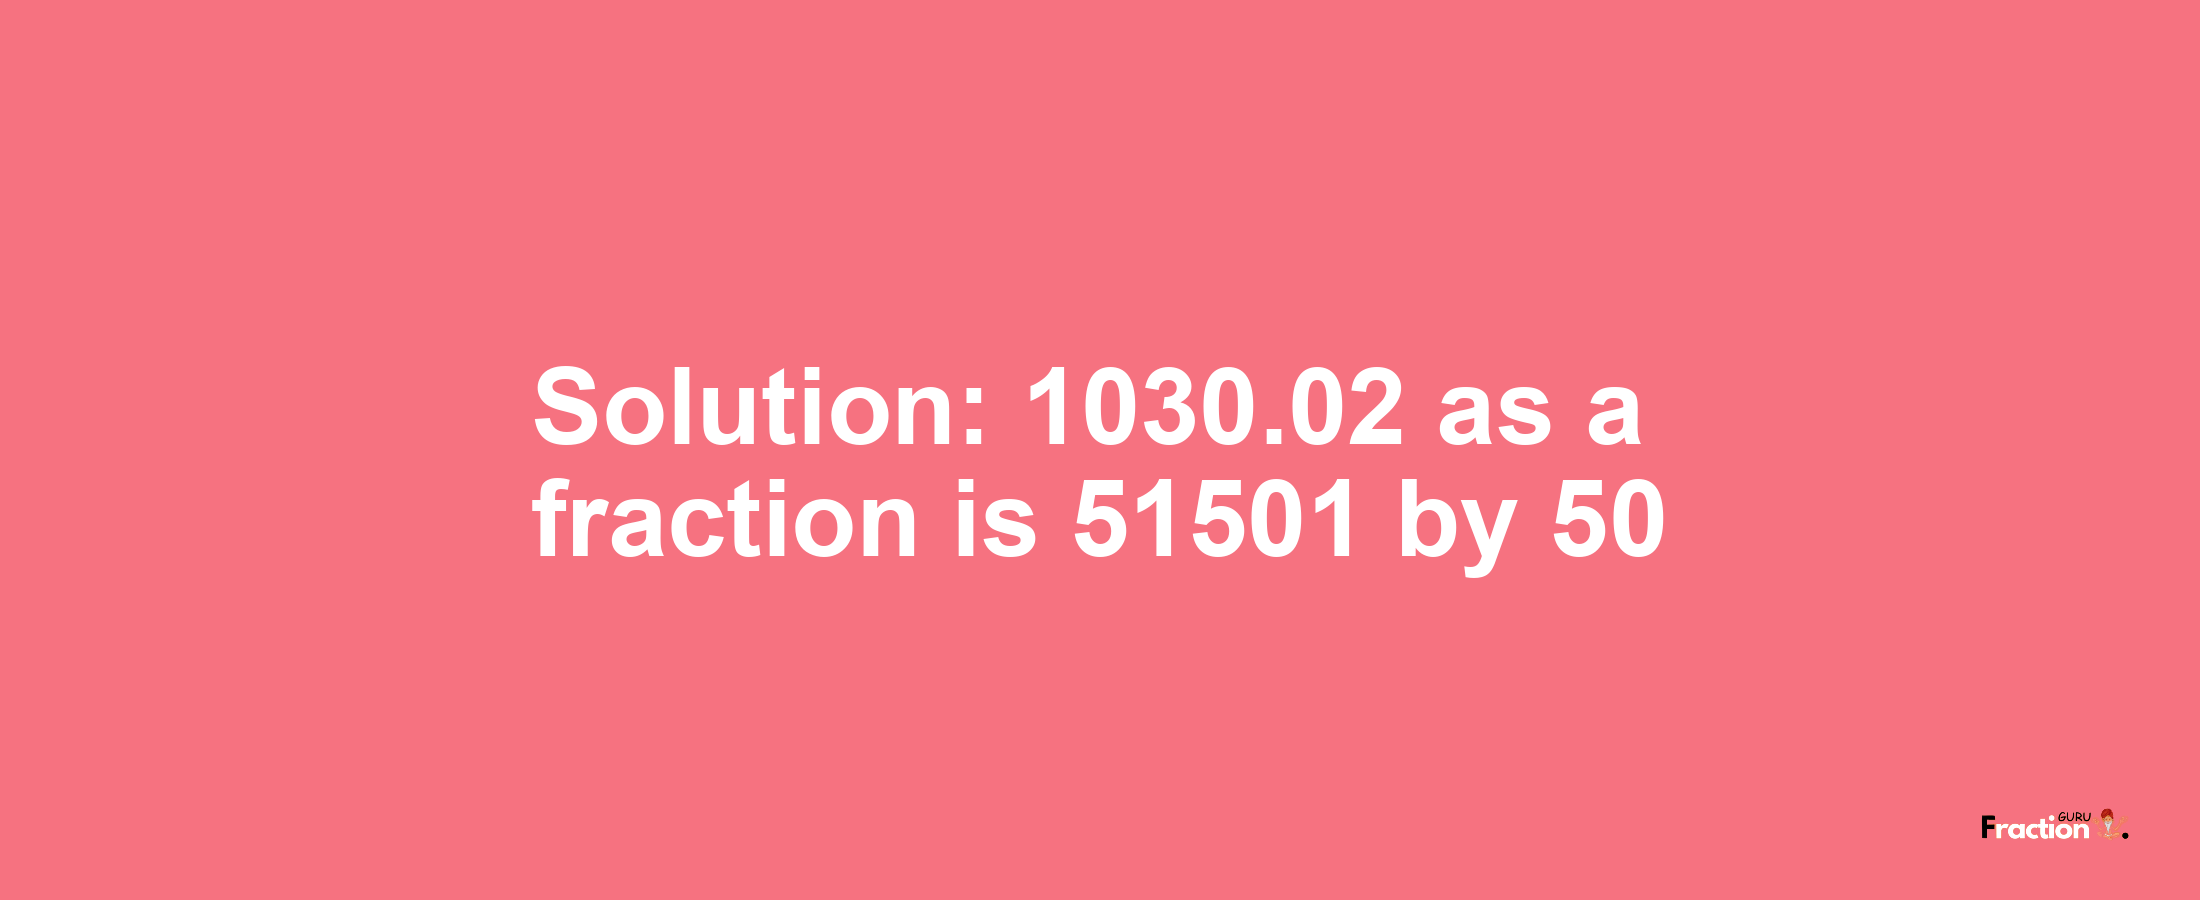 Solution:1030.02 as a fraction is 51501/50